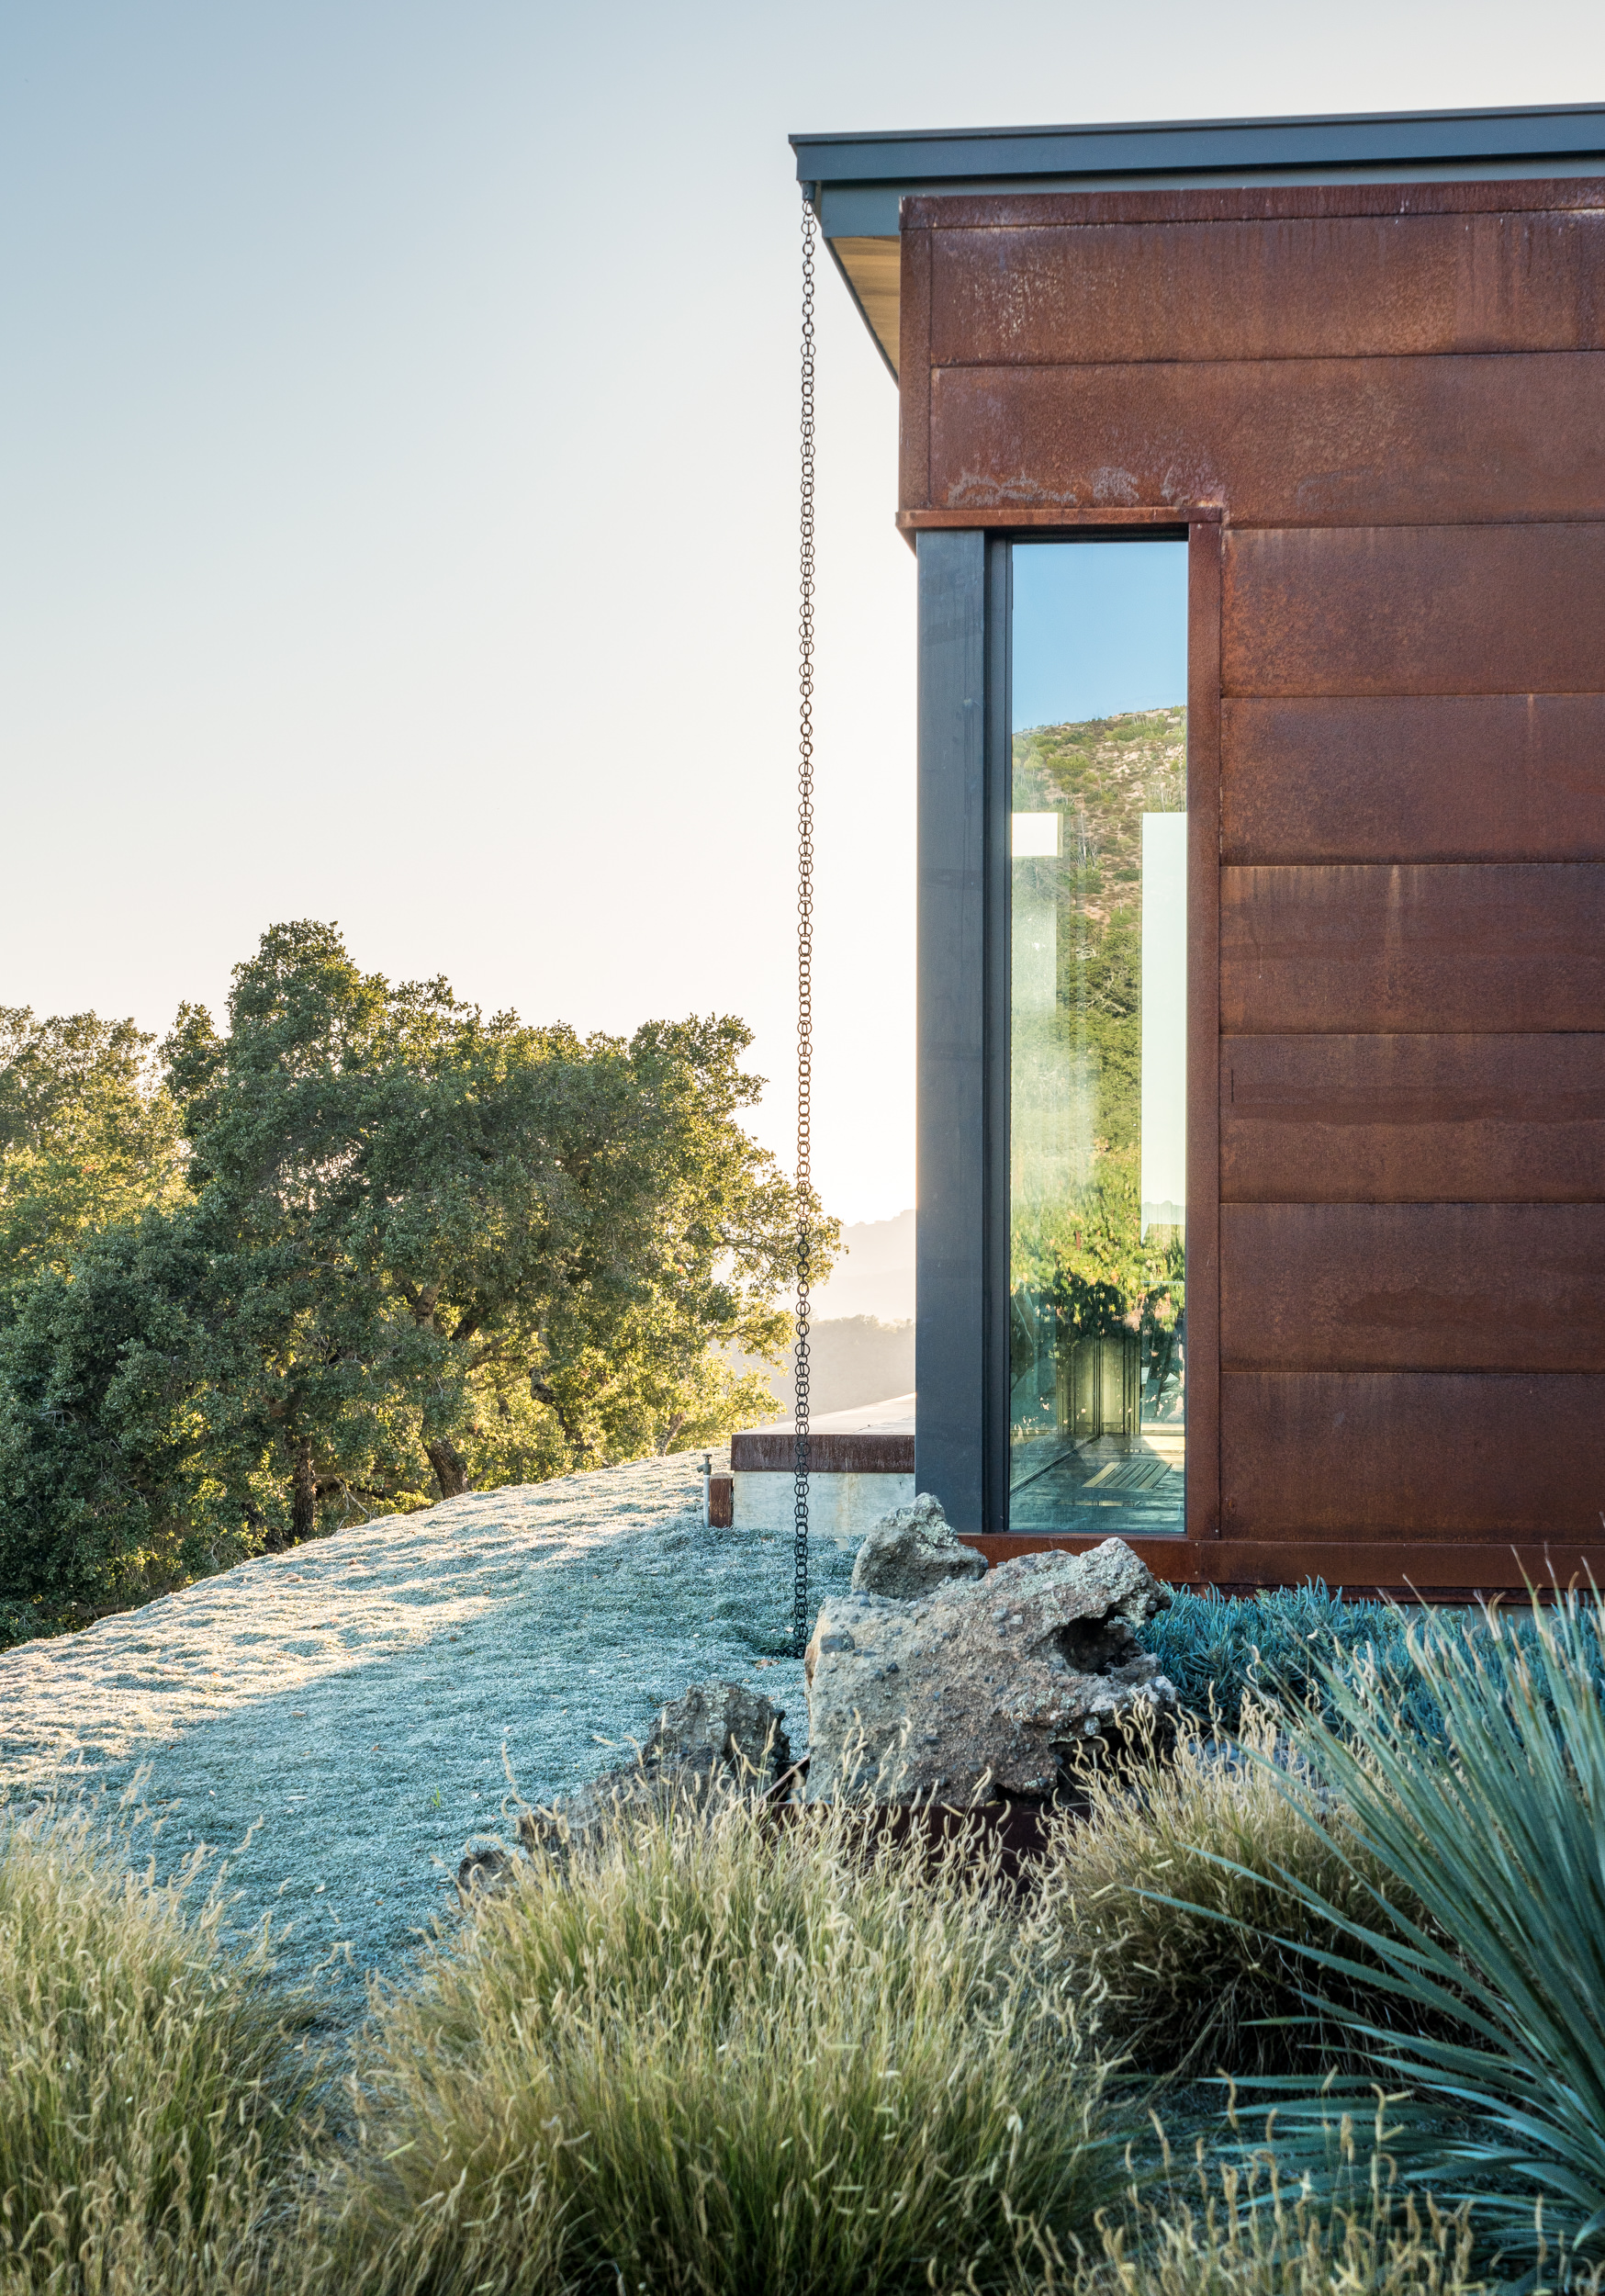 A simplified palette of Corten steel, iron, wood, and concrete complement the structural rammed earth walls and keep the focus on the surrounding landscape and vineyards. (Adam Potts)